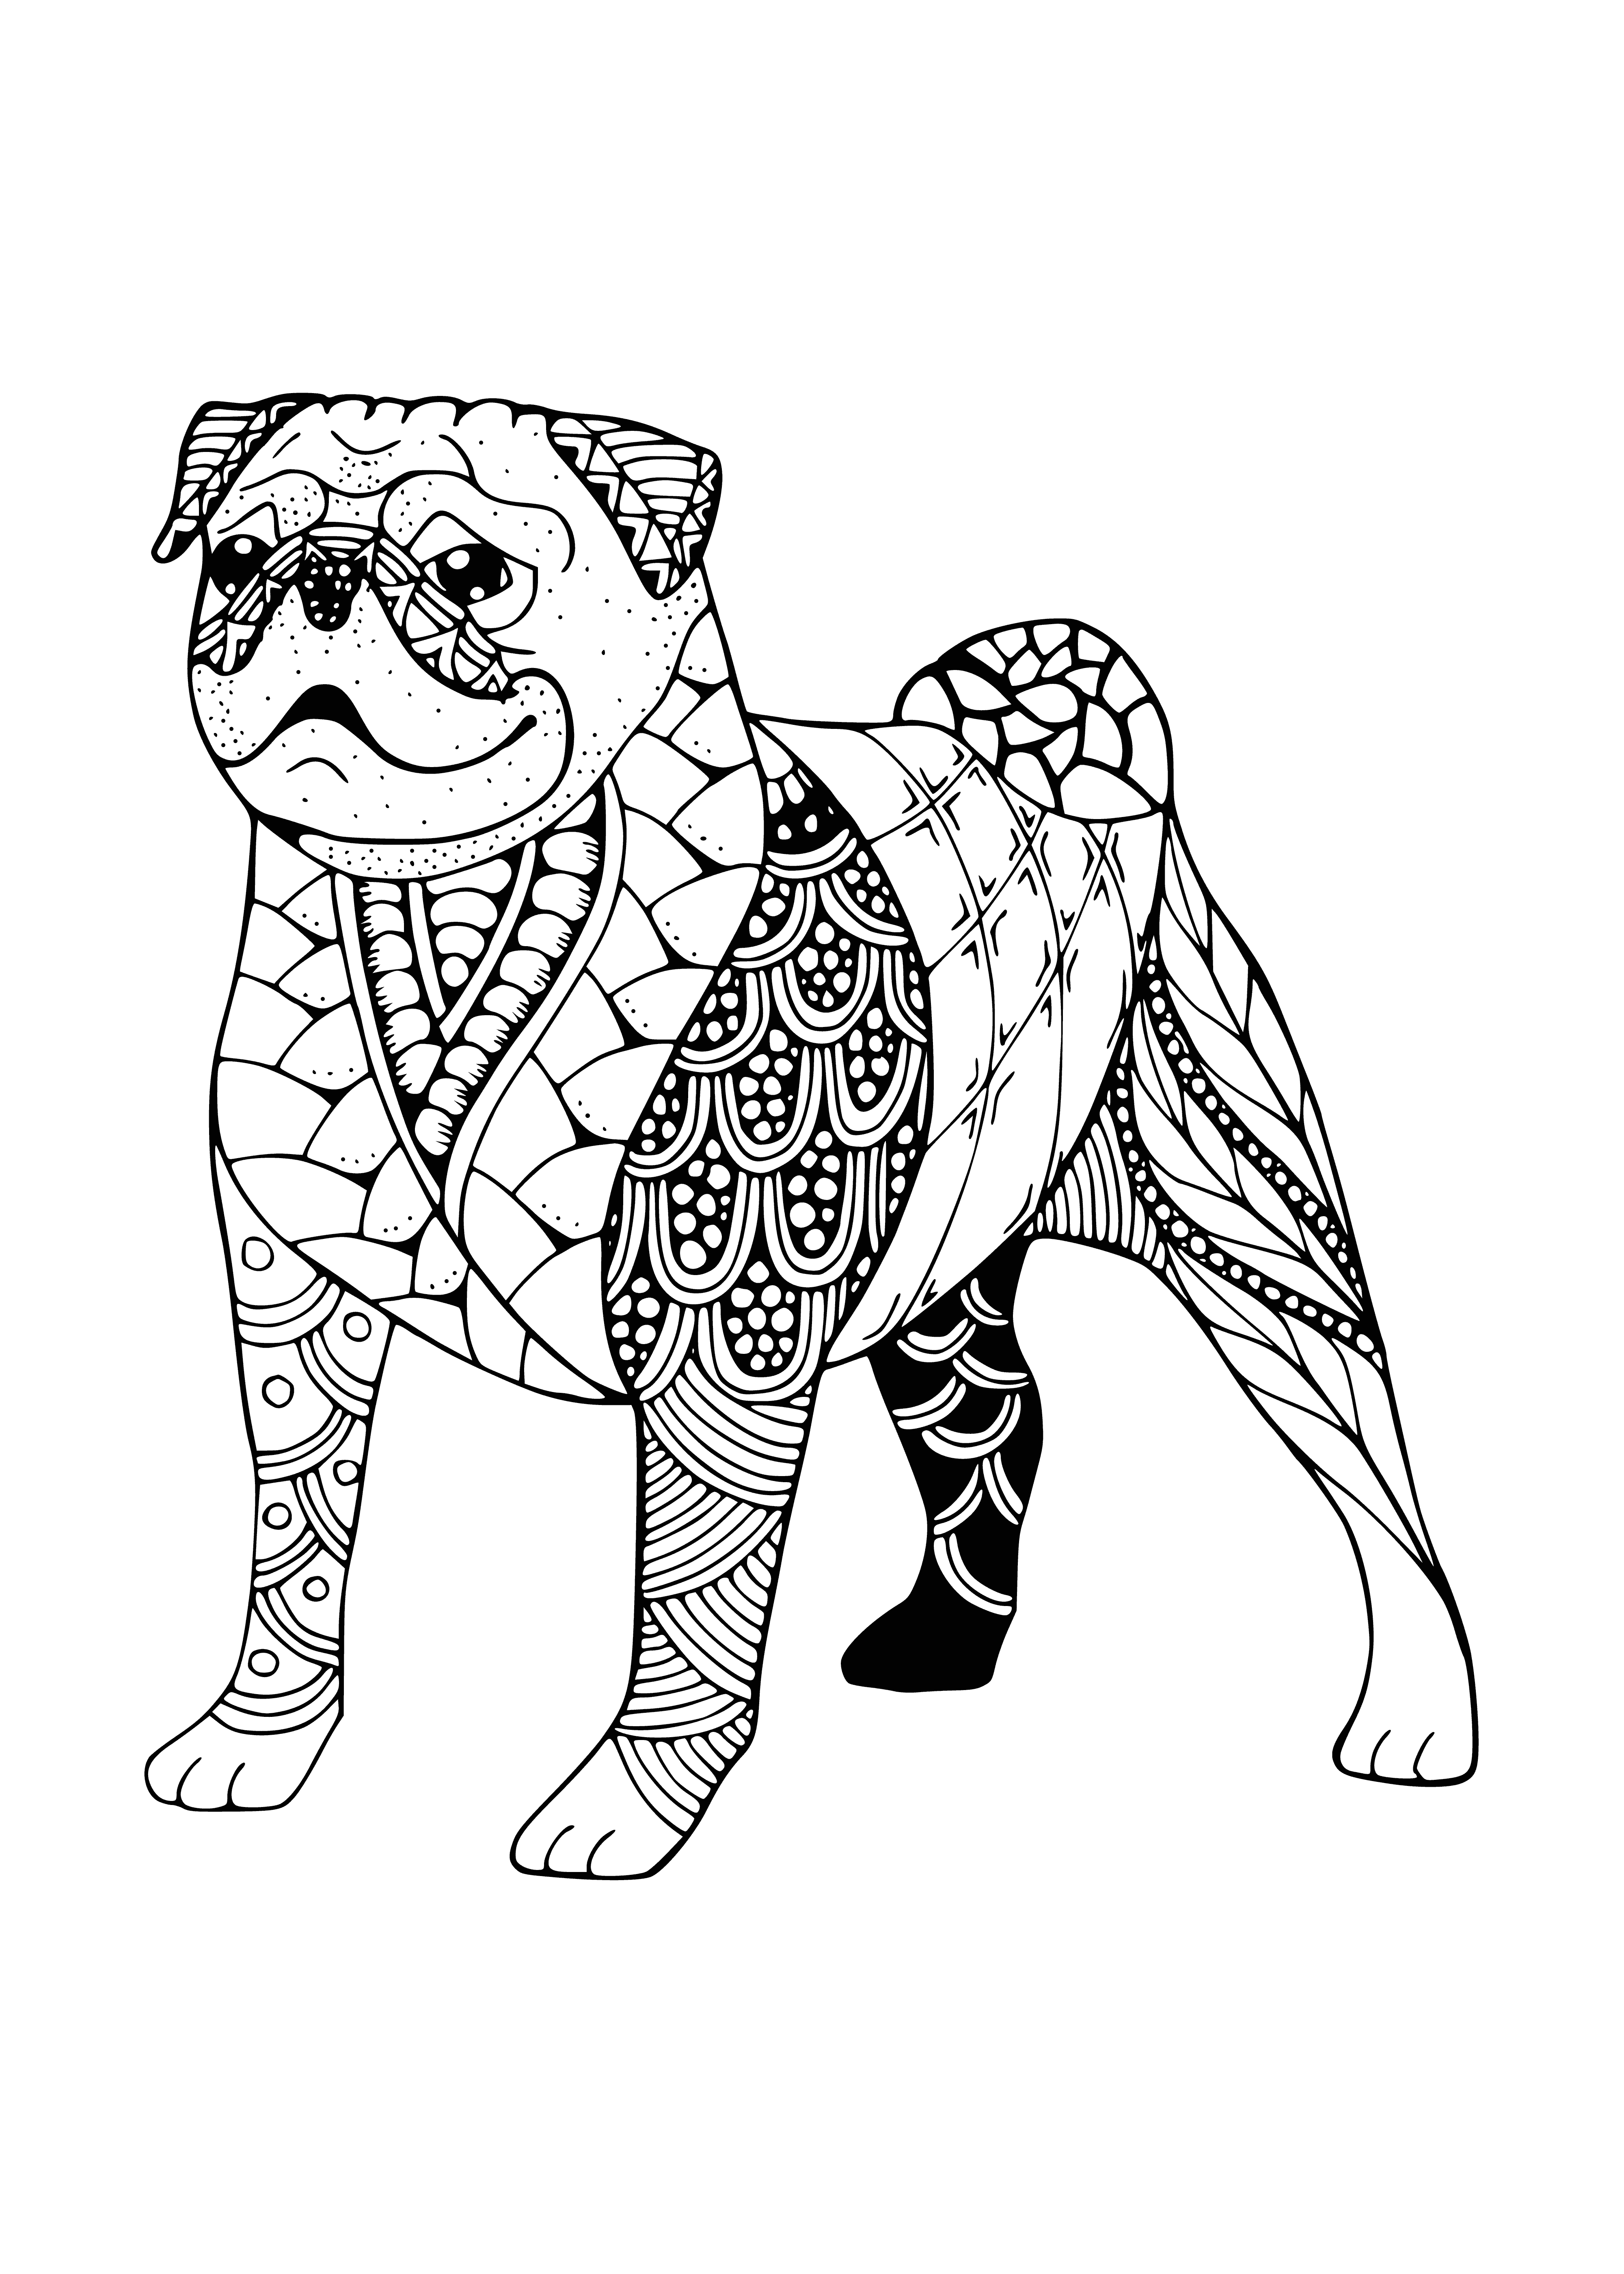 coloring page: Black & white line drawing of a pug dog standing, head turned, big round eyes, and a curly tail. #pug #dogdrawing